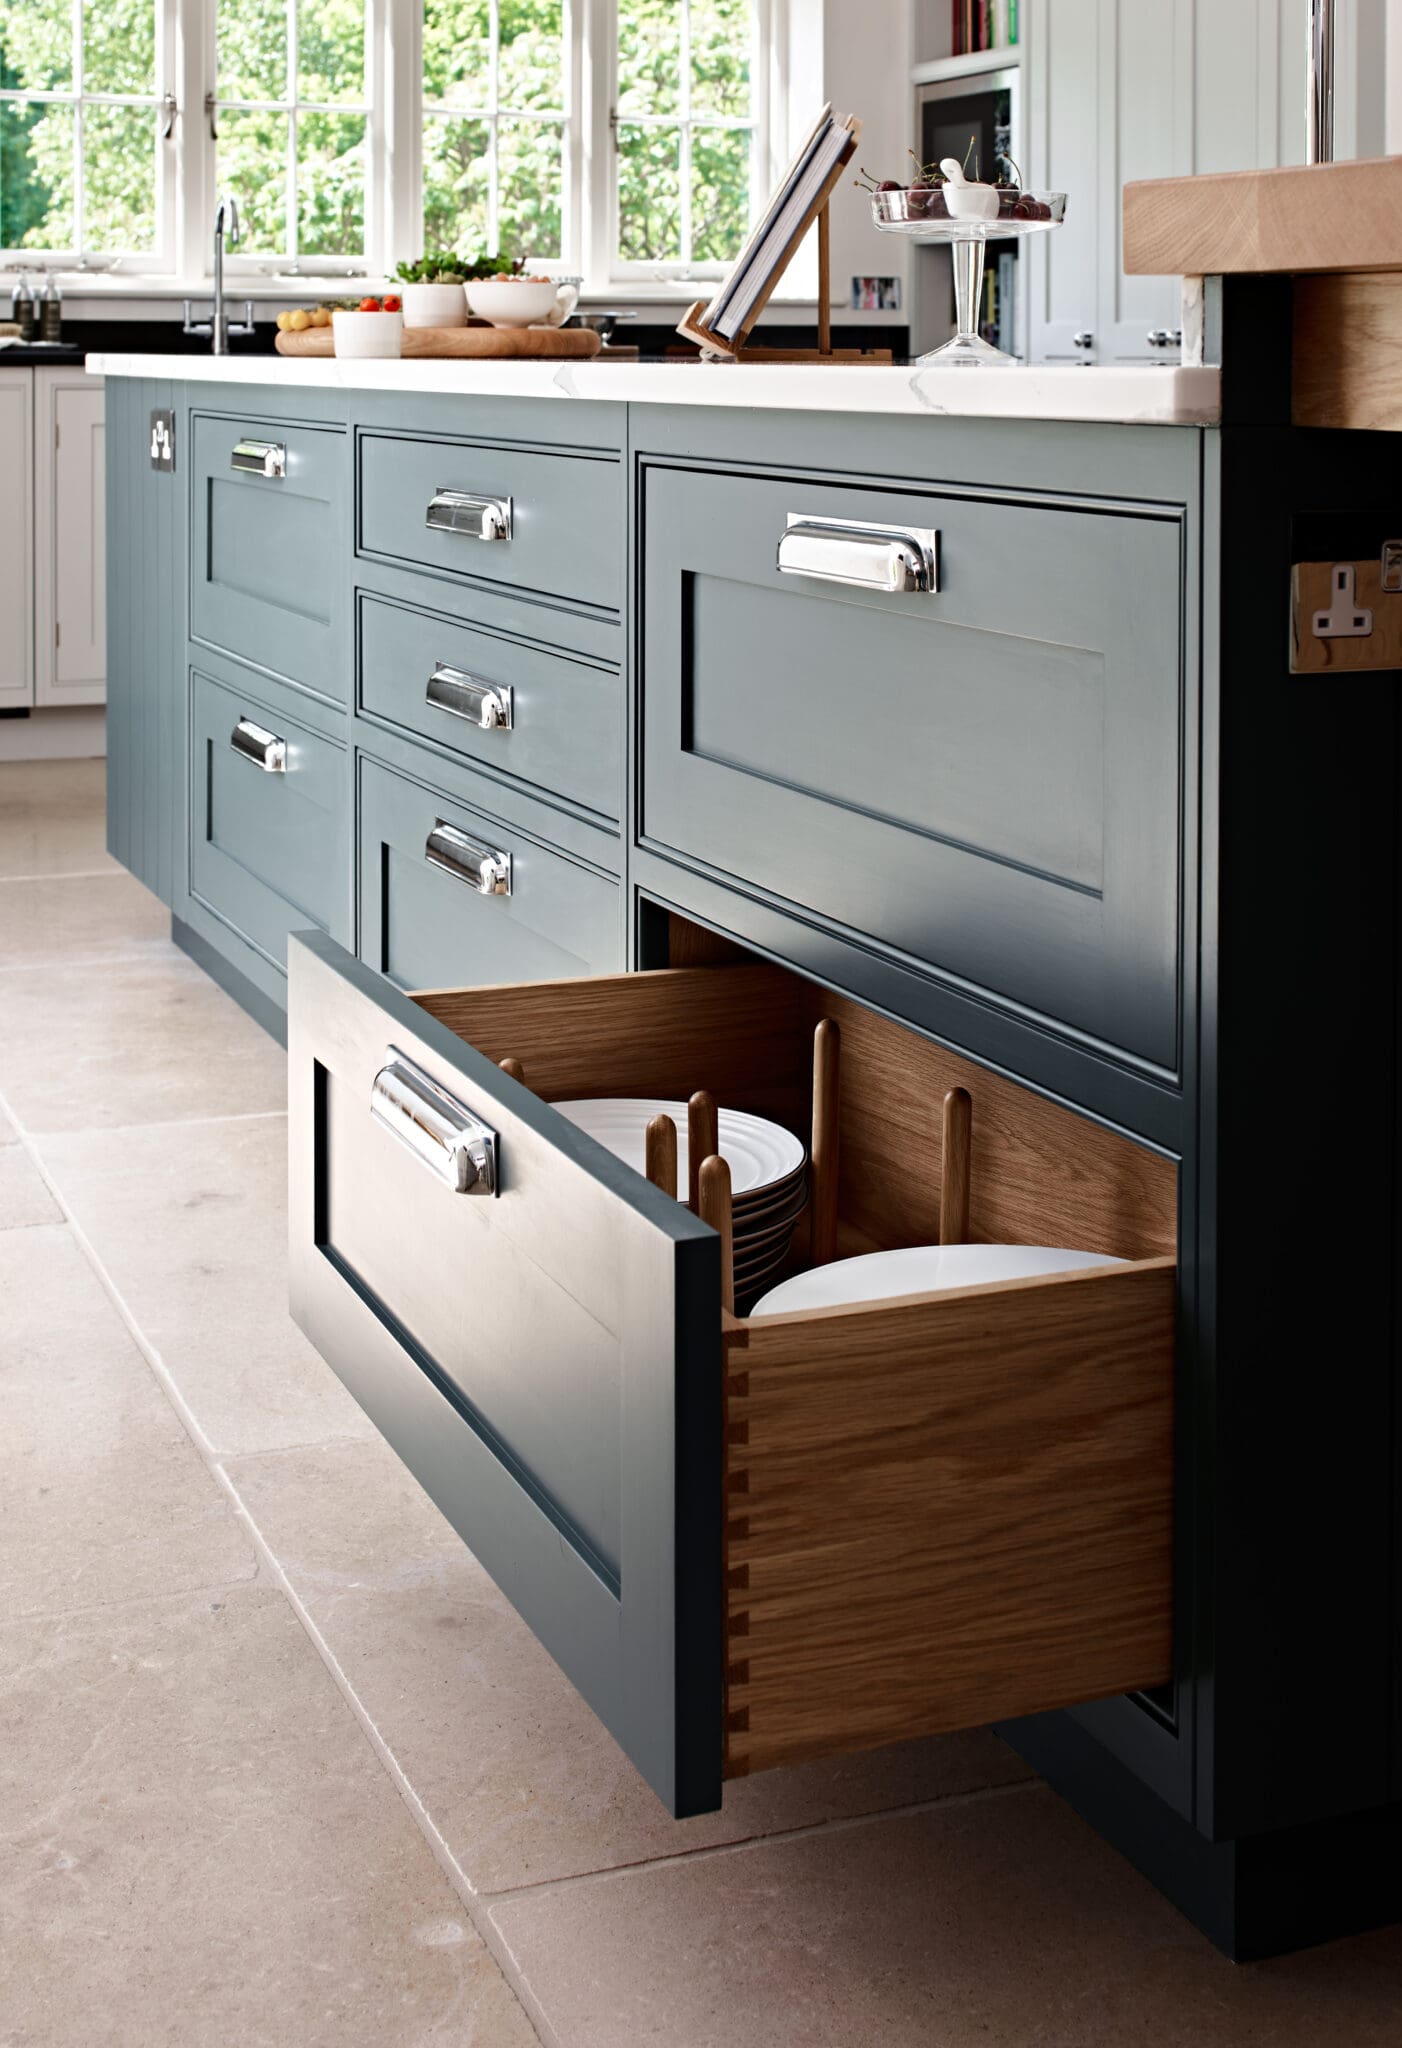 Newbury Country Home Classic Shaker Kitchen in Farrow and Ball